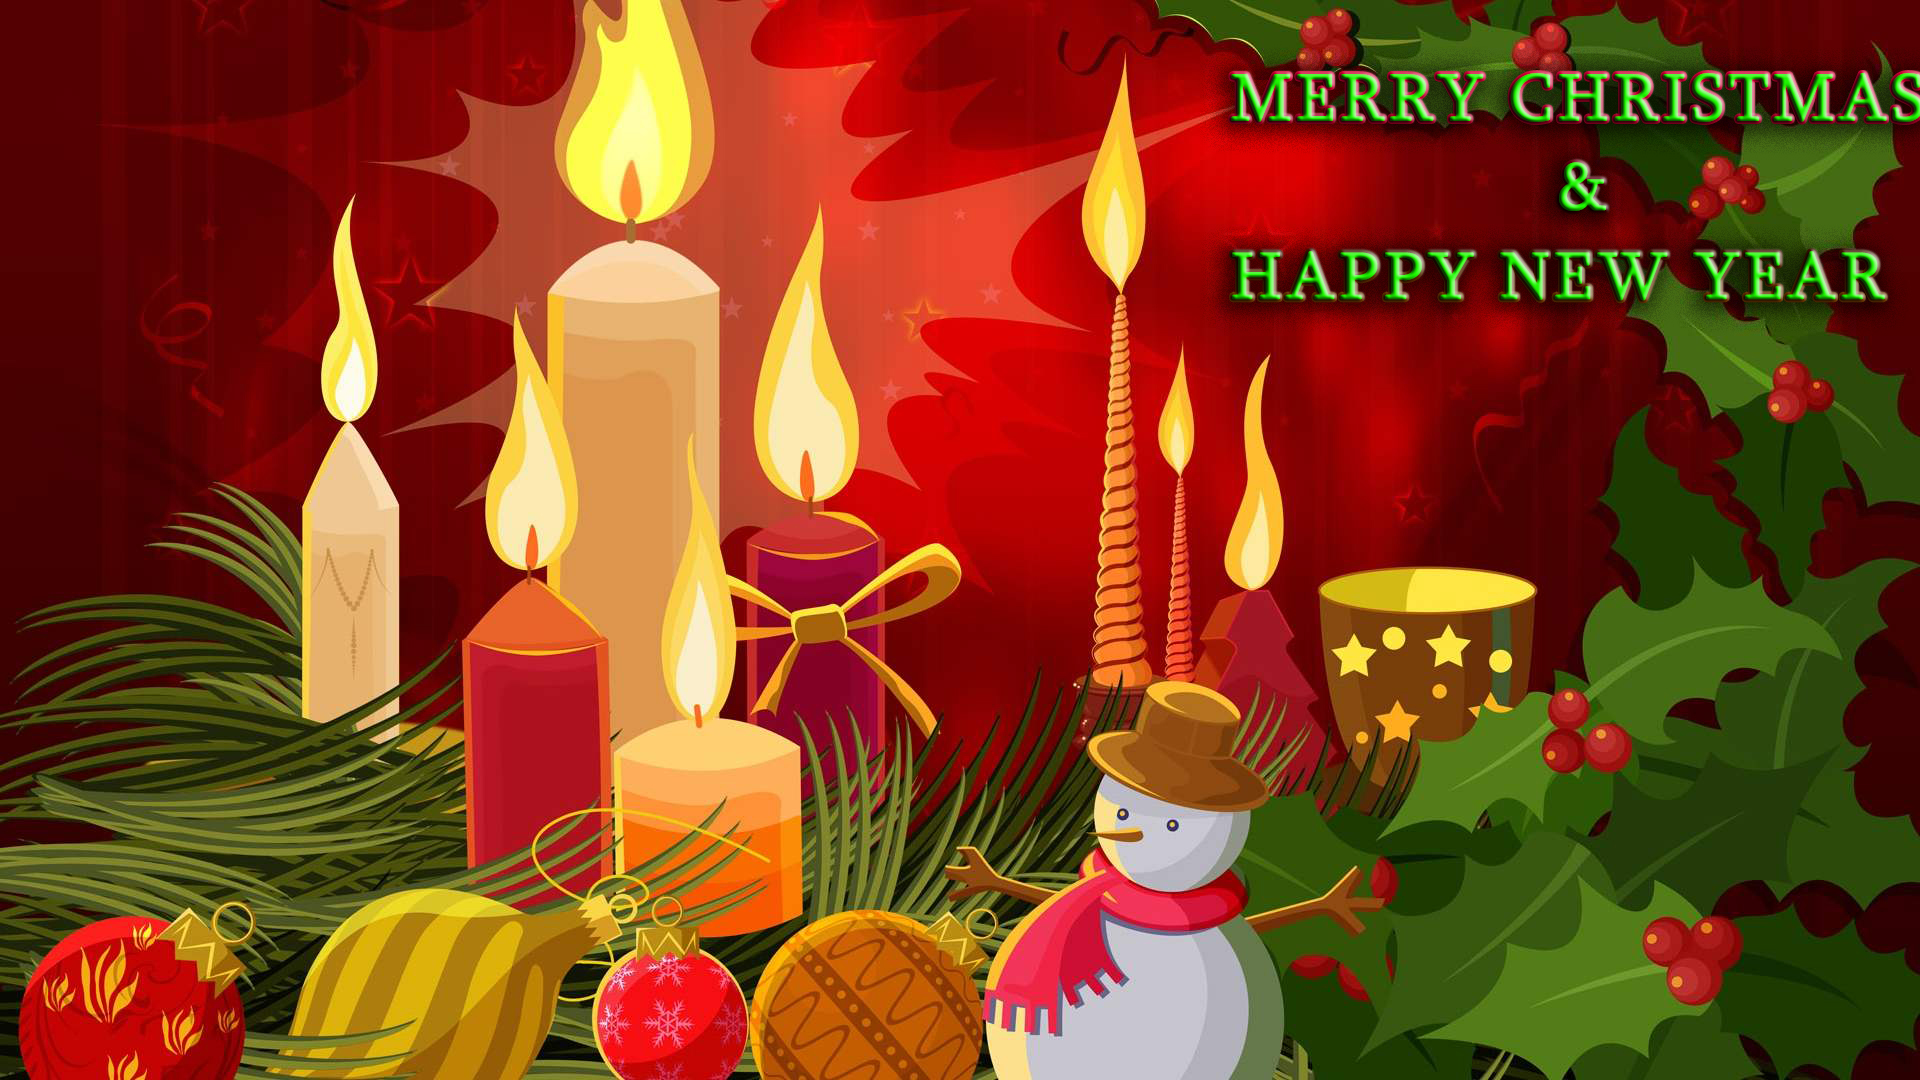 Merry Christmas And Happy New Year Image Hd